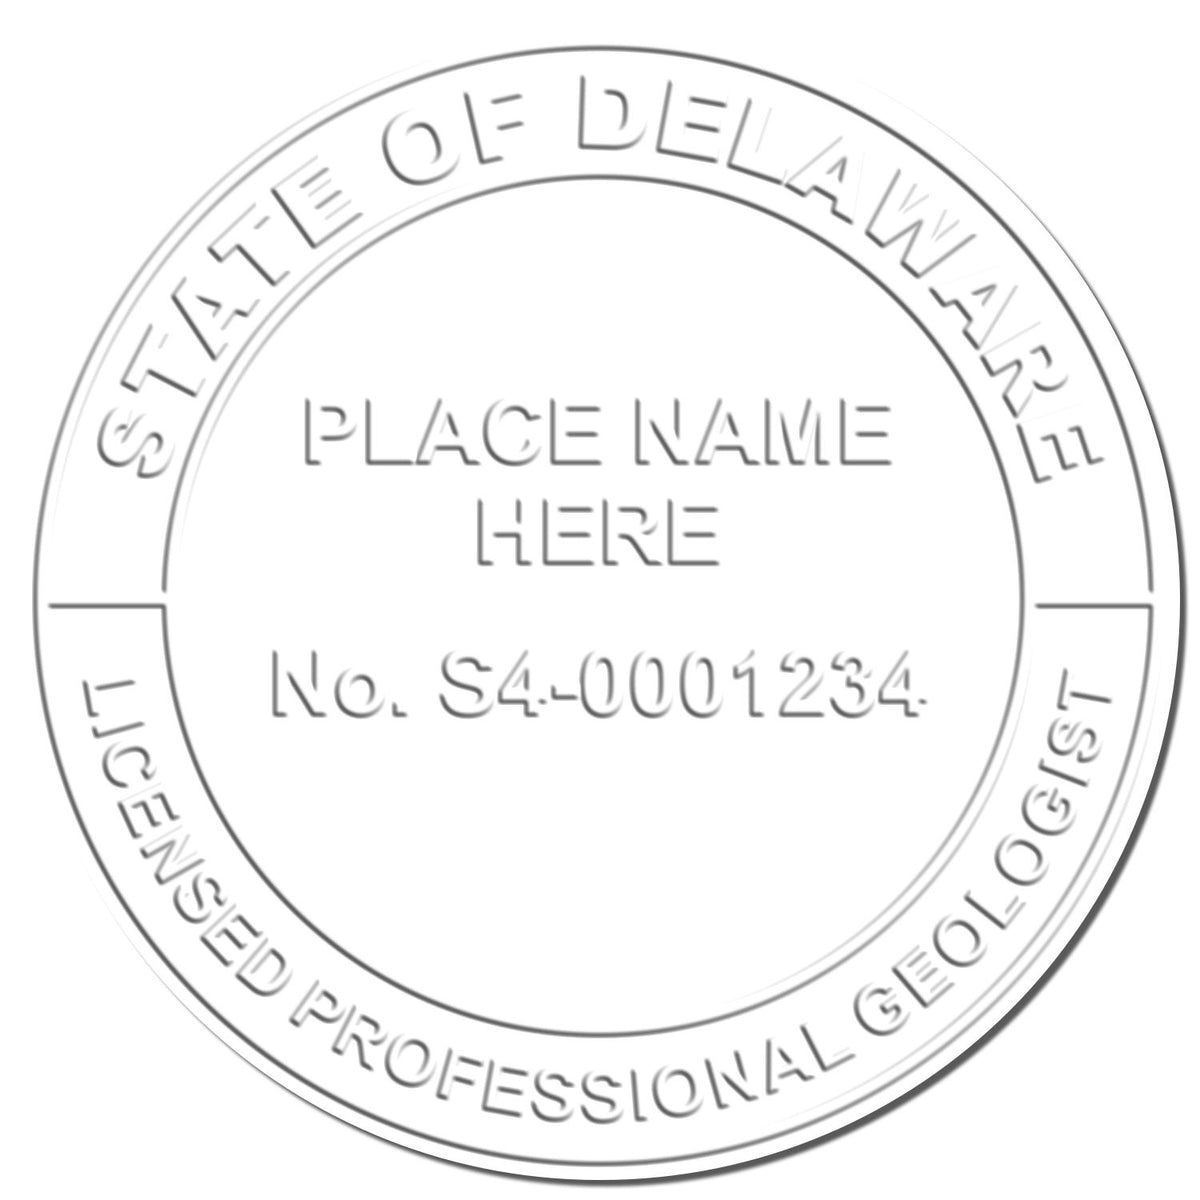 The Delaware Geologist Desk Seal stamp impression comes to life with a crisp, detailed image stamped on paper - showcasing true professional quality.